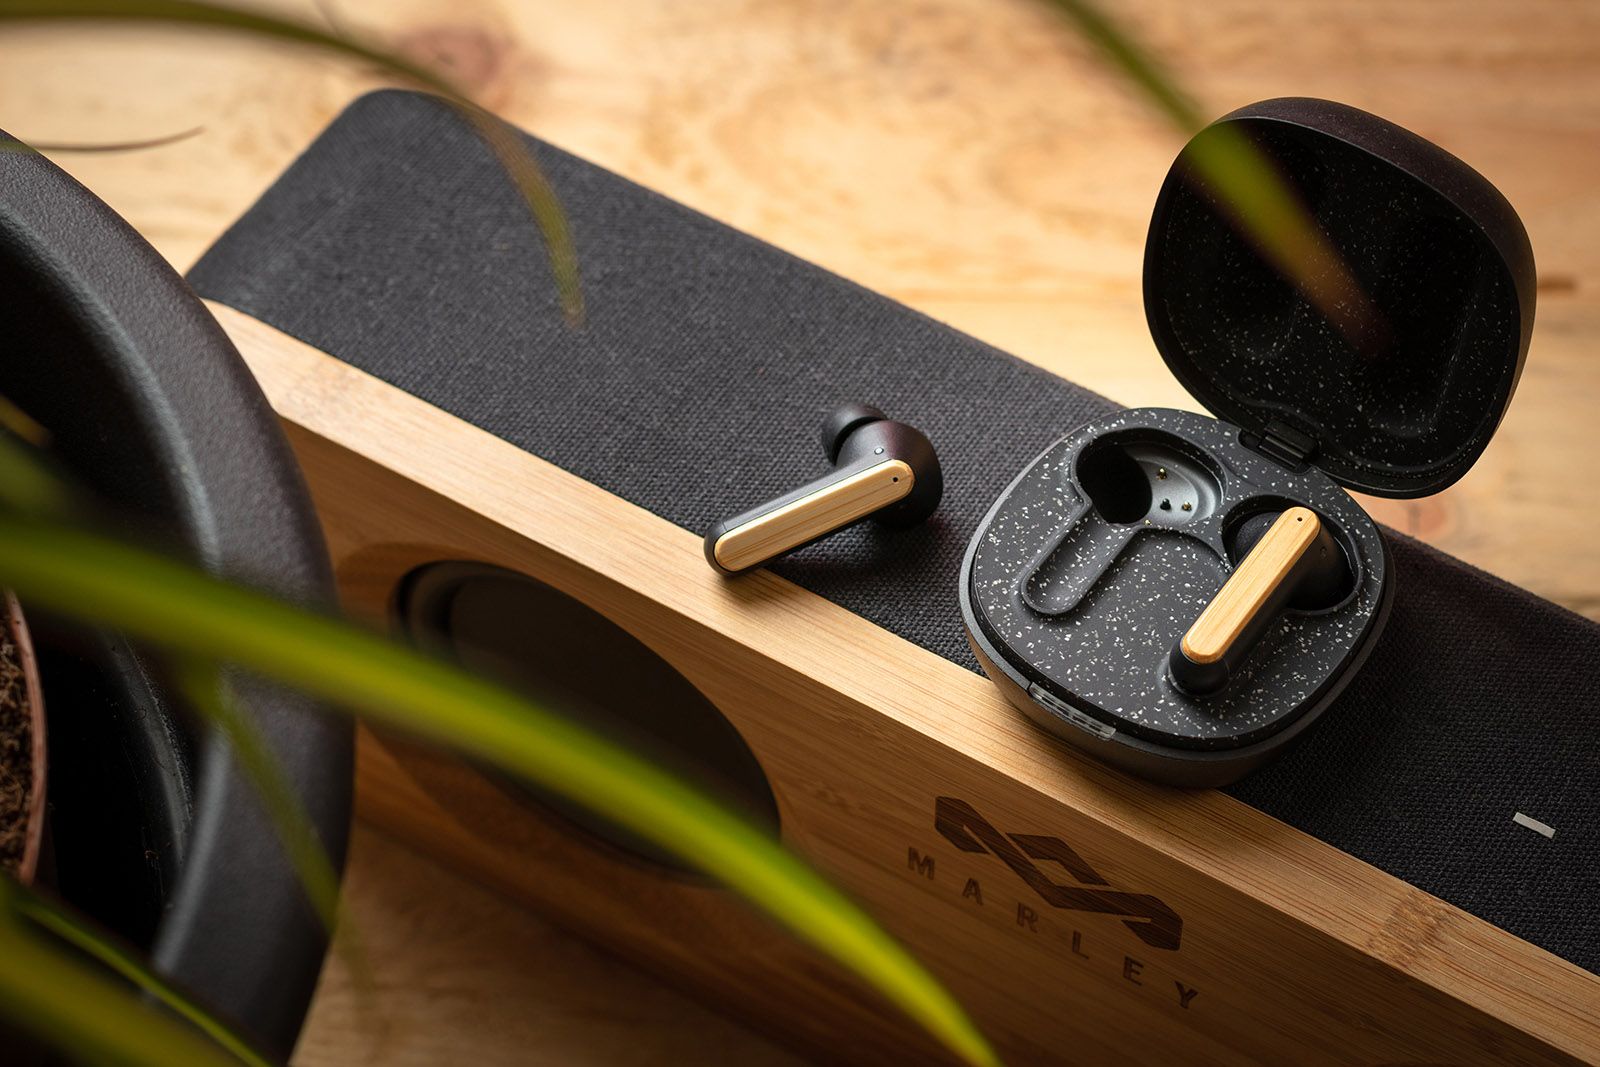 House of Marley Redemption ANC true wireless buds launched for 75th anniversary image 1